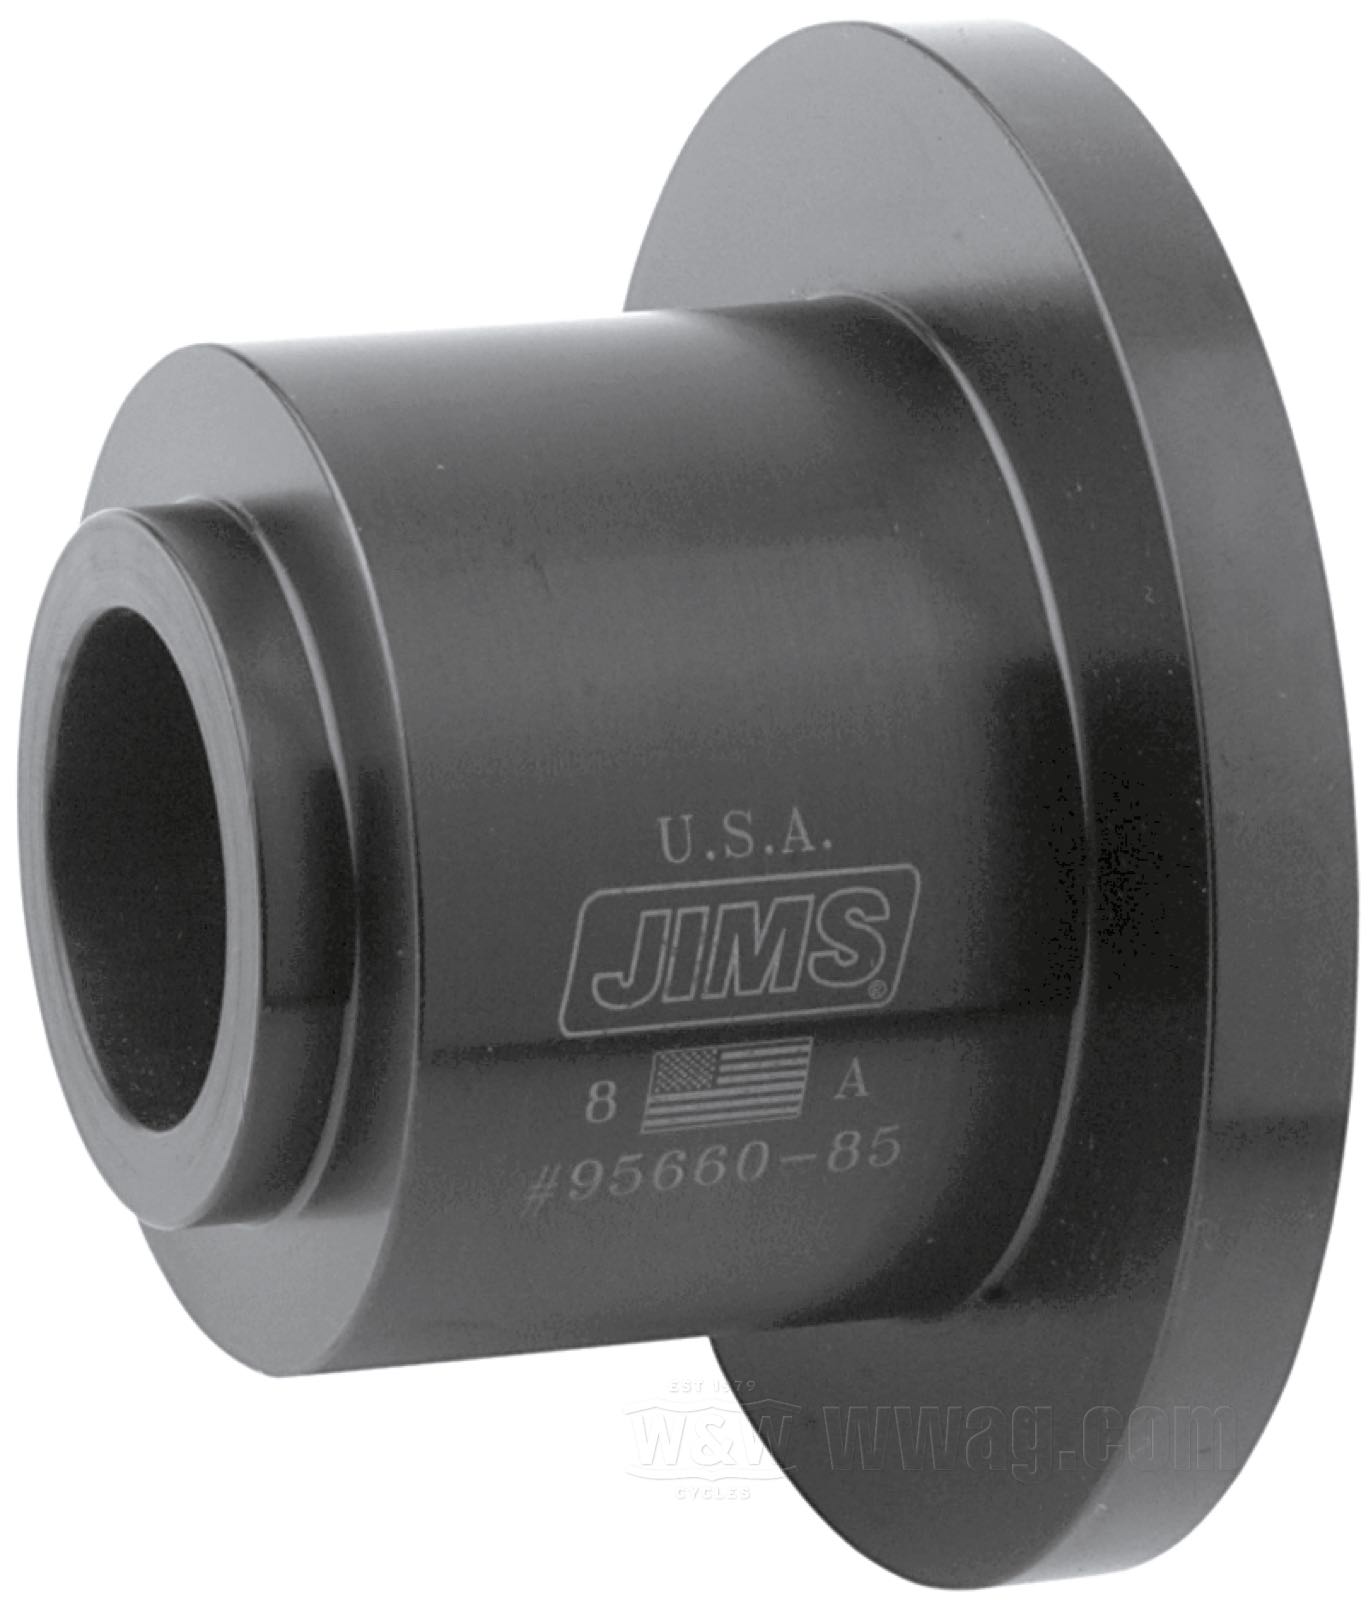 W&W Cycles - Jims Main Seal Installation Tools for 5-Speed Big Twins for  Harley-Davidson